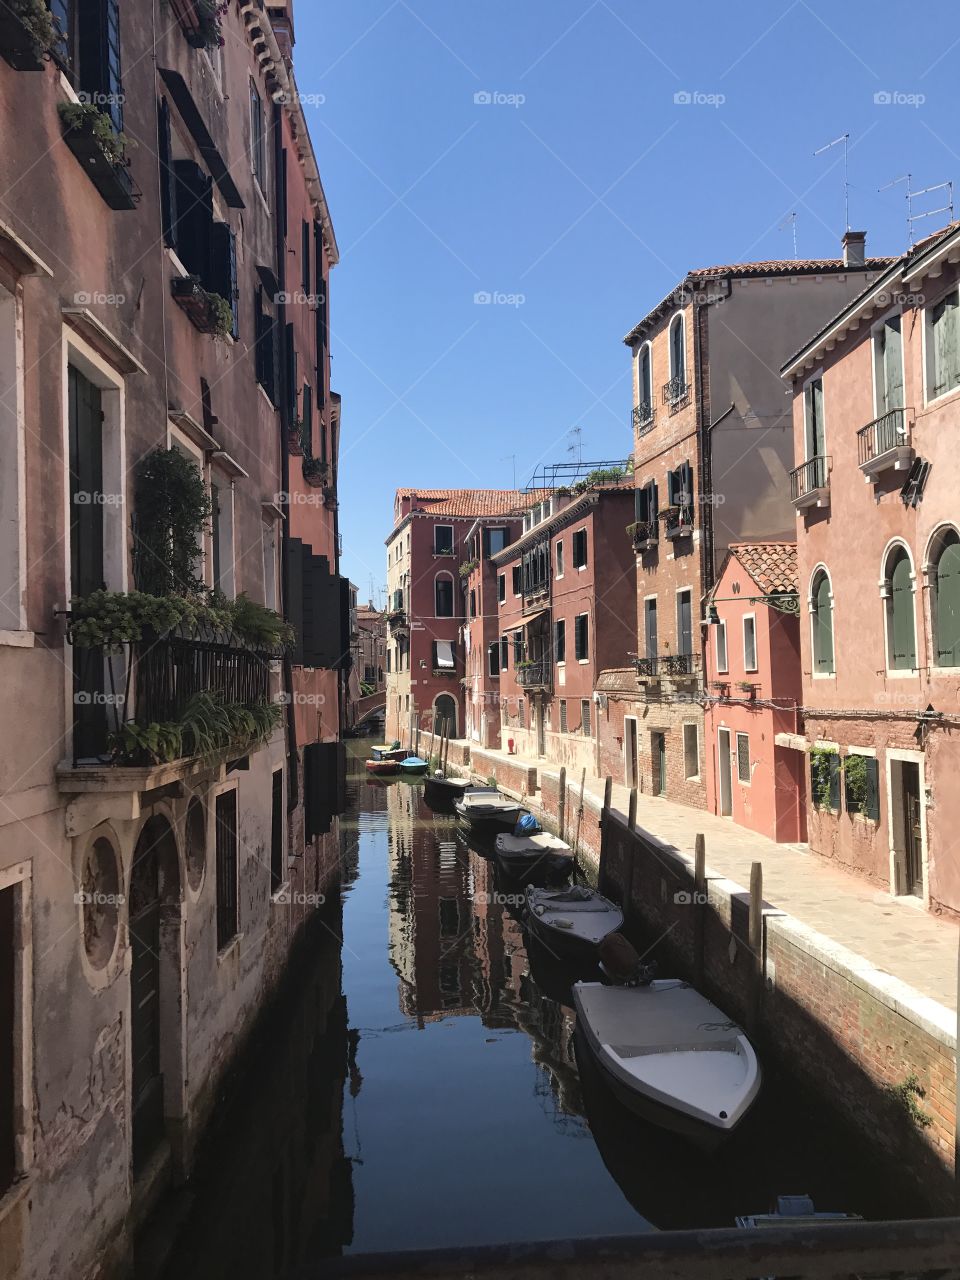 Magical view of the Venice canal 